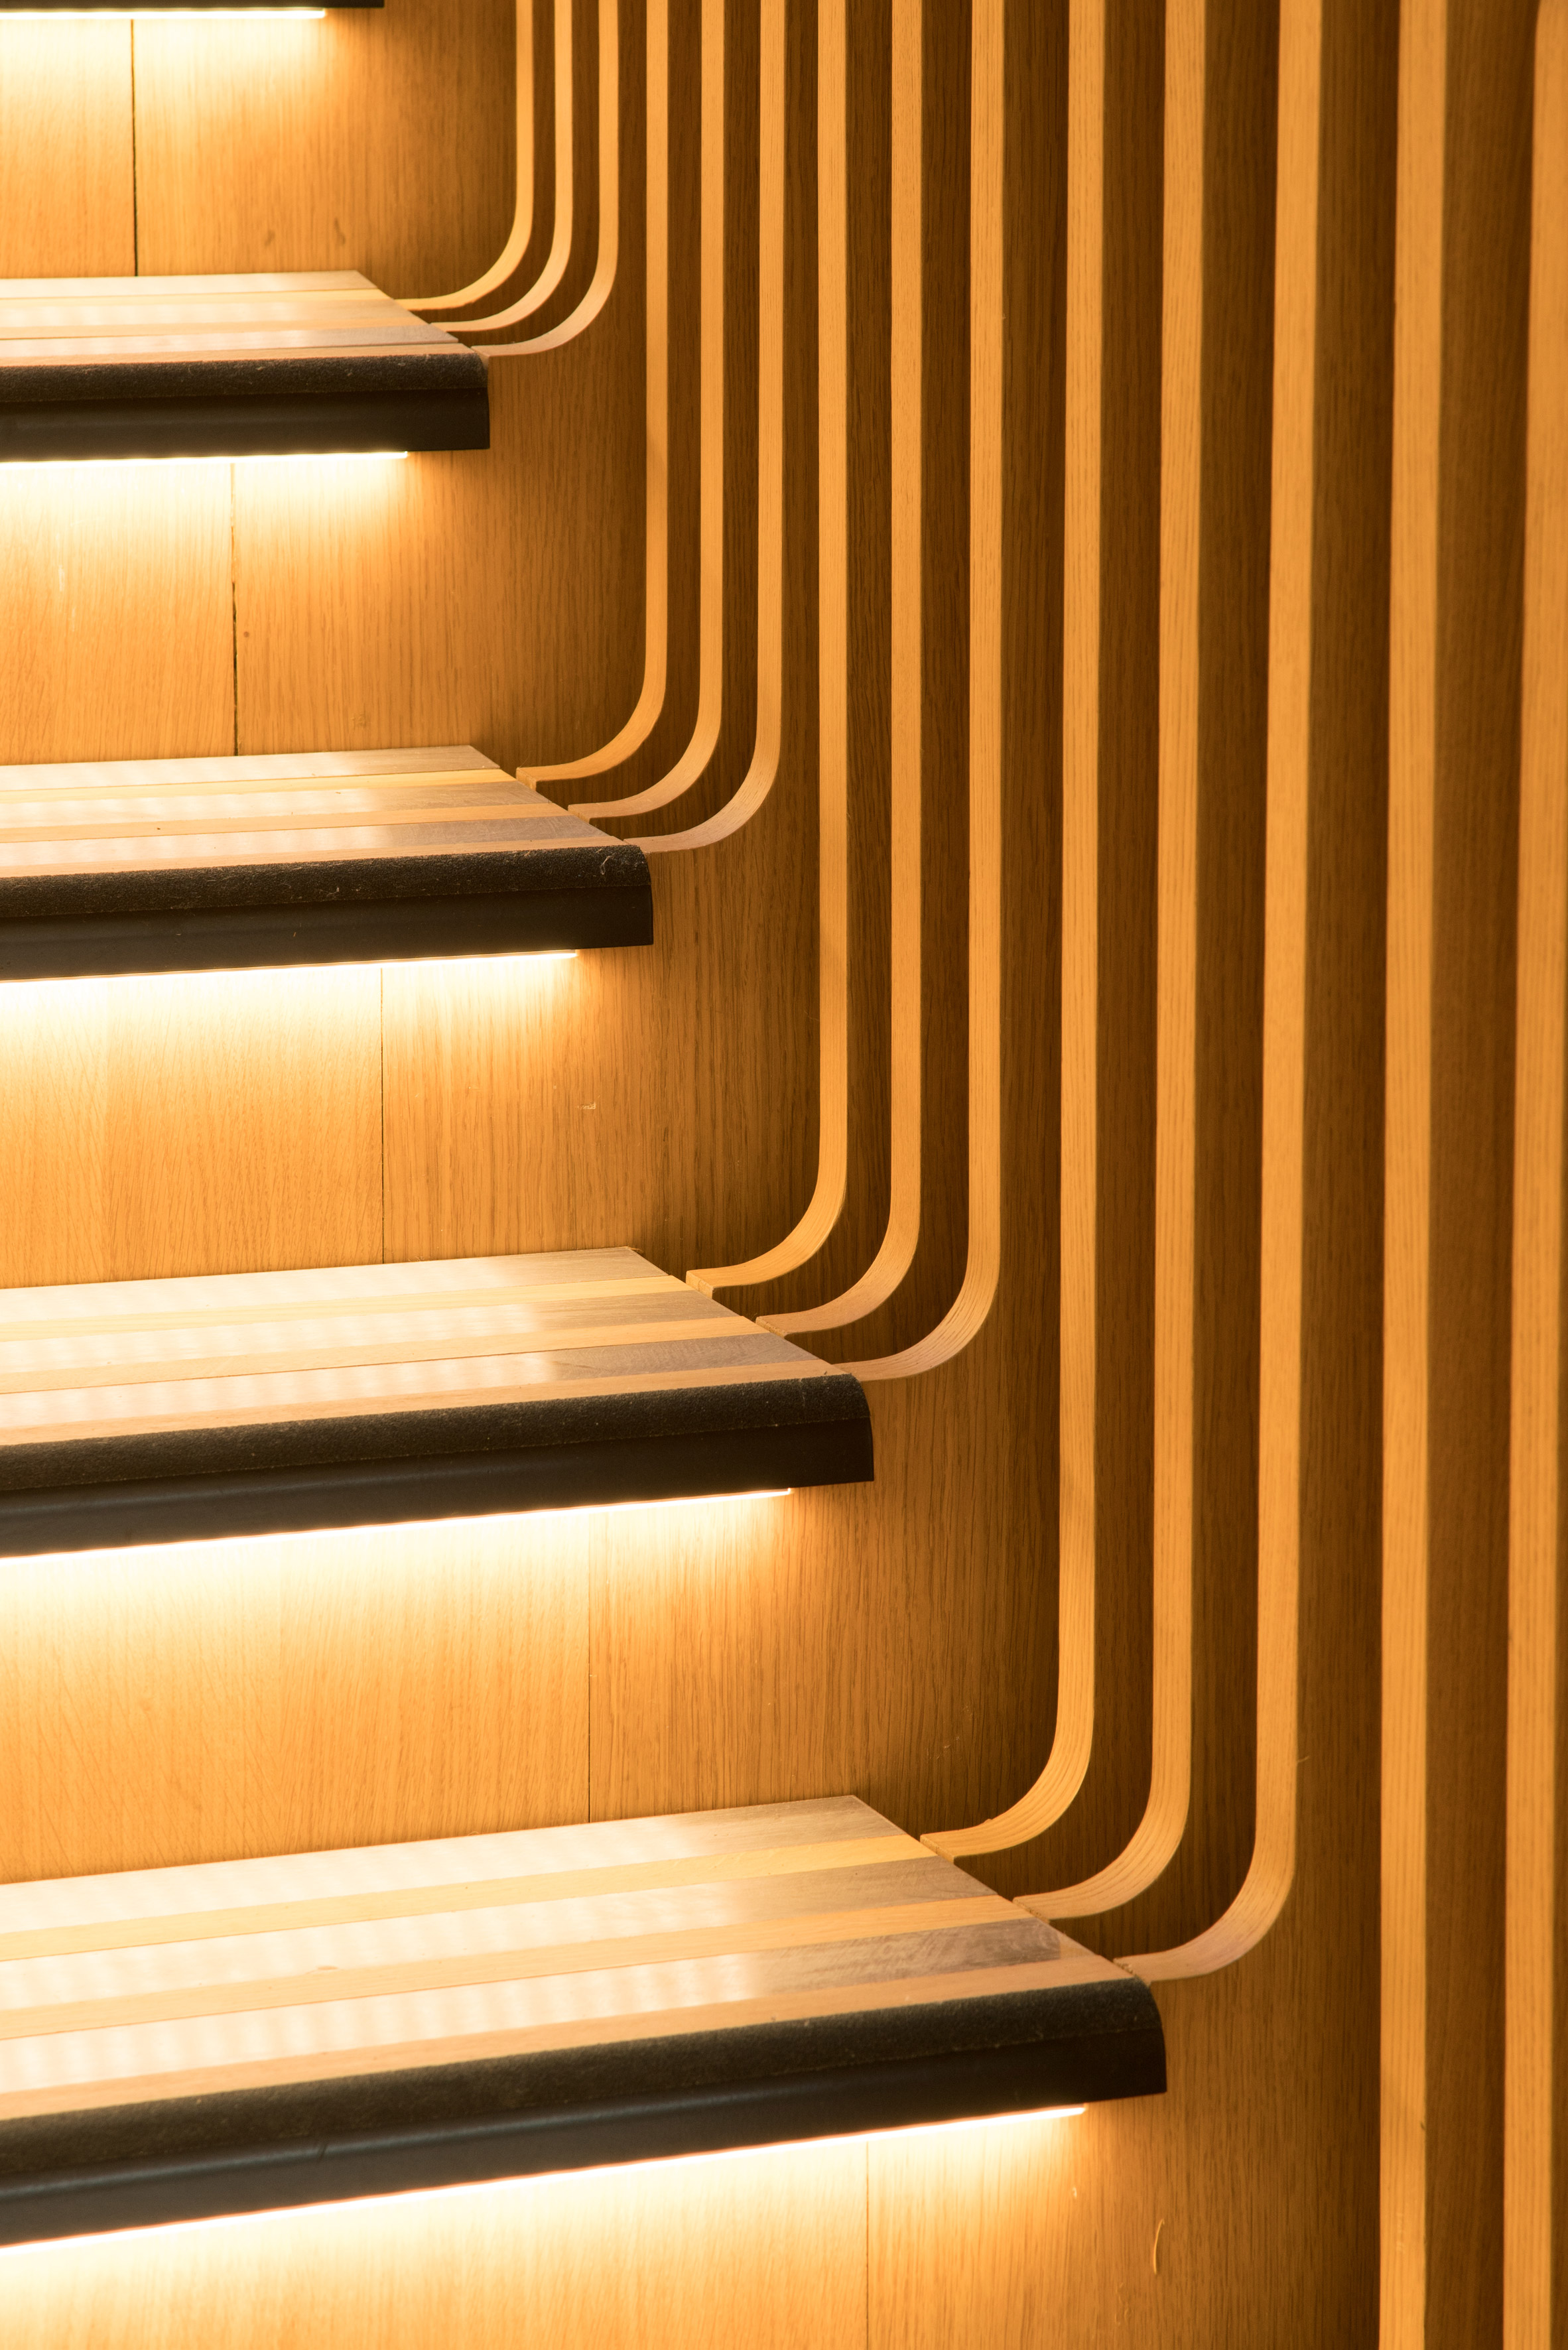 Ora Ïto uses hundreds of wooden slats for snaking stairs at LVMH offices